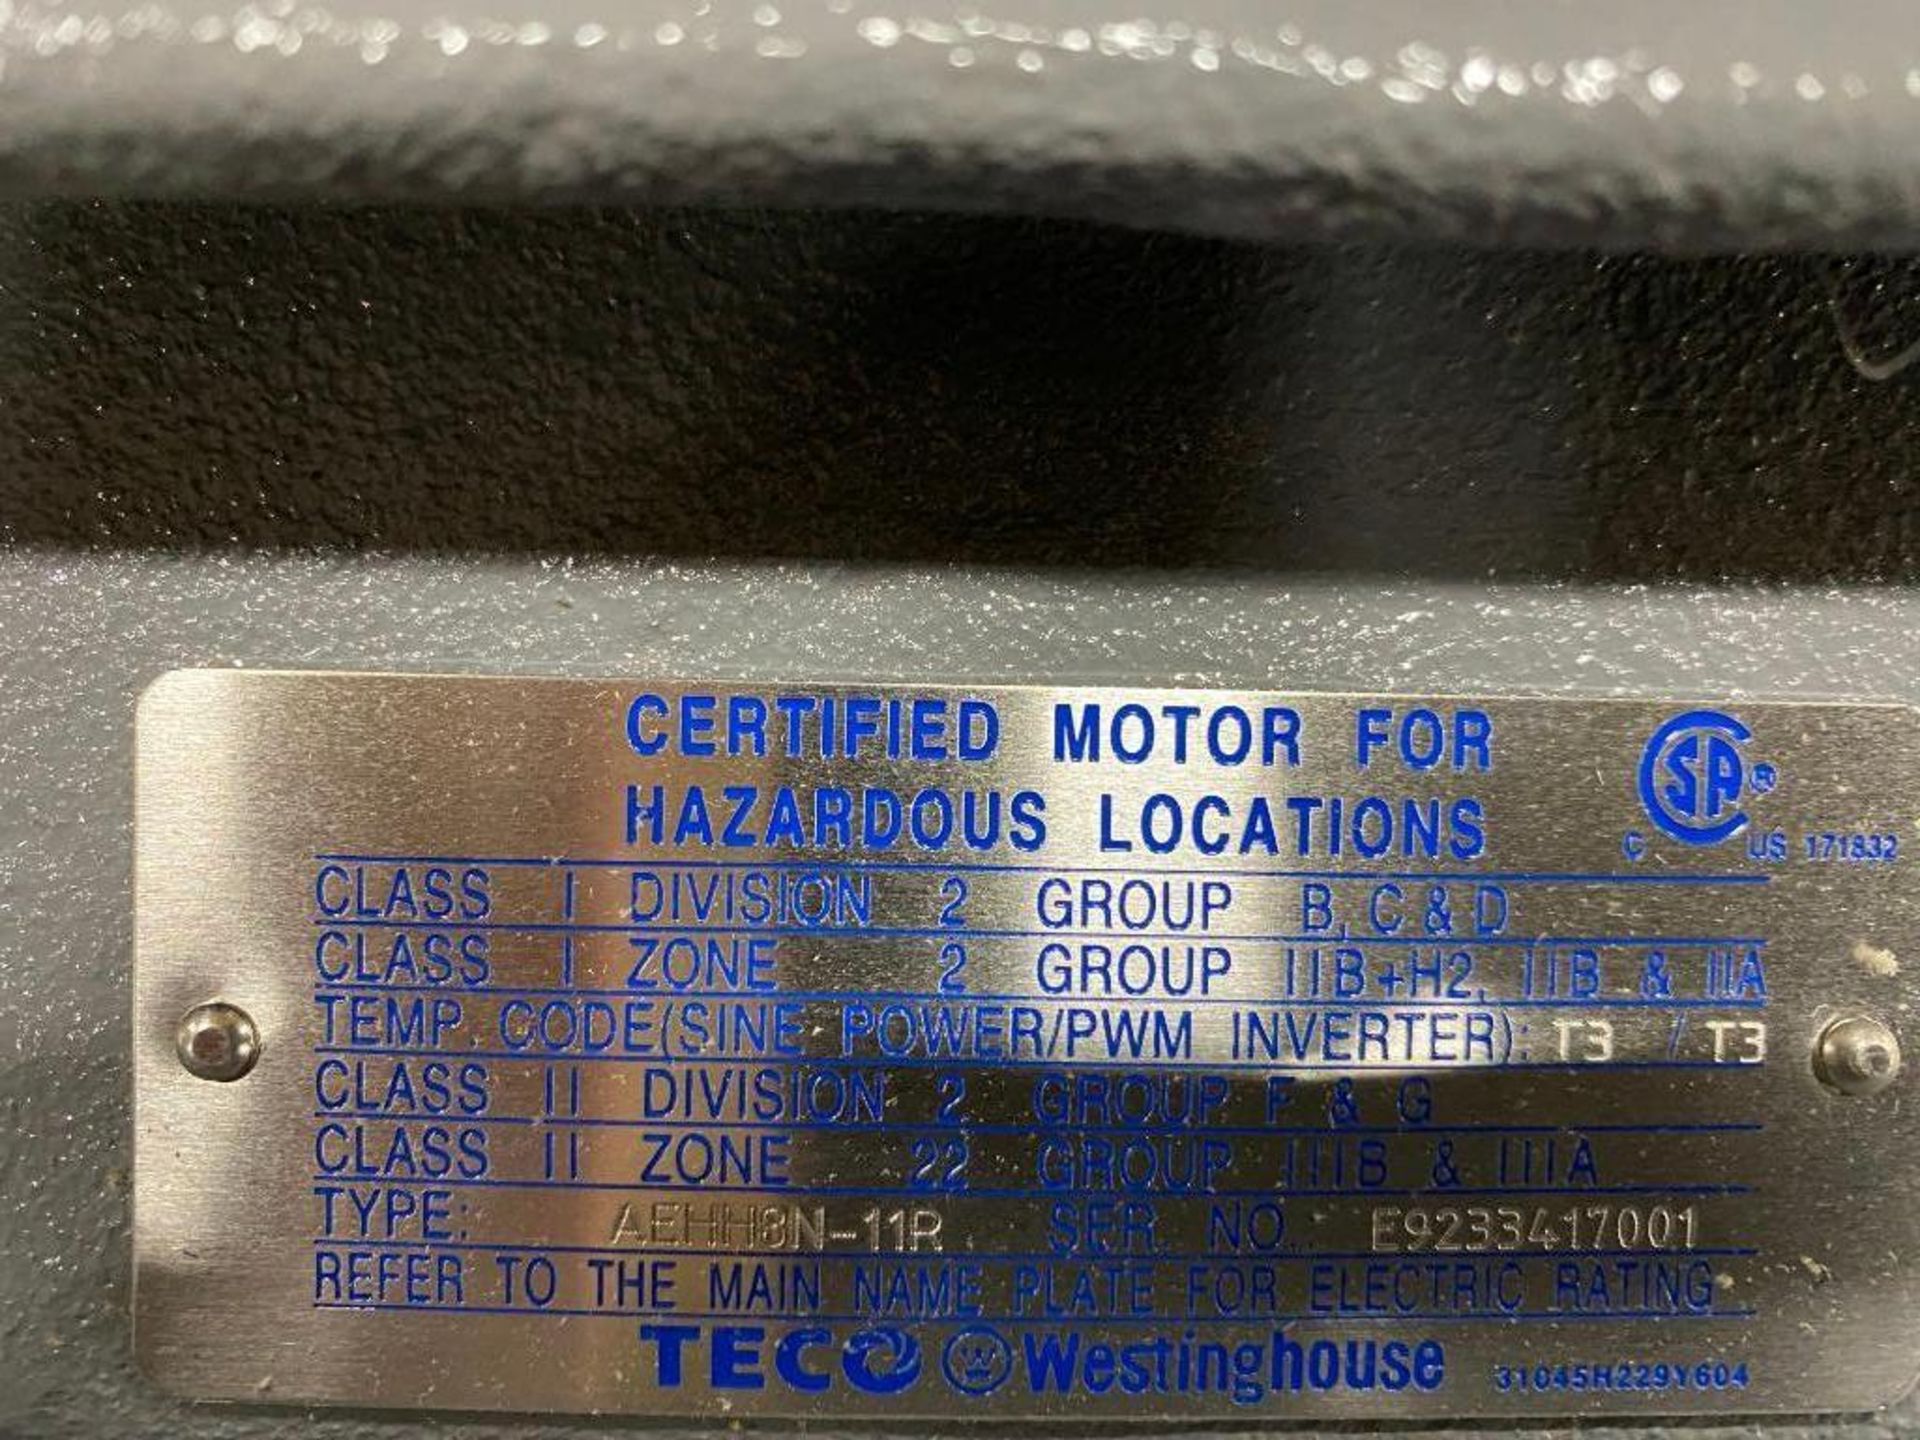 TECO Westinghouse 150 HP Electric Motor, 460 V, 1185 RPM, 447T Frame, 176 AMPS - Image 3 of 3